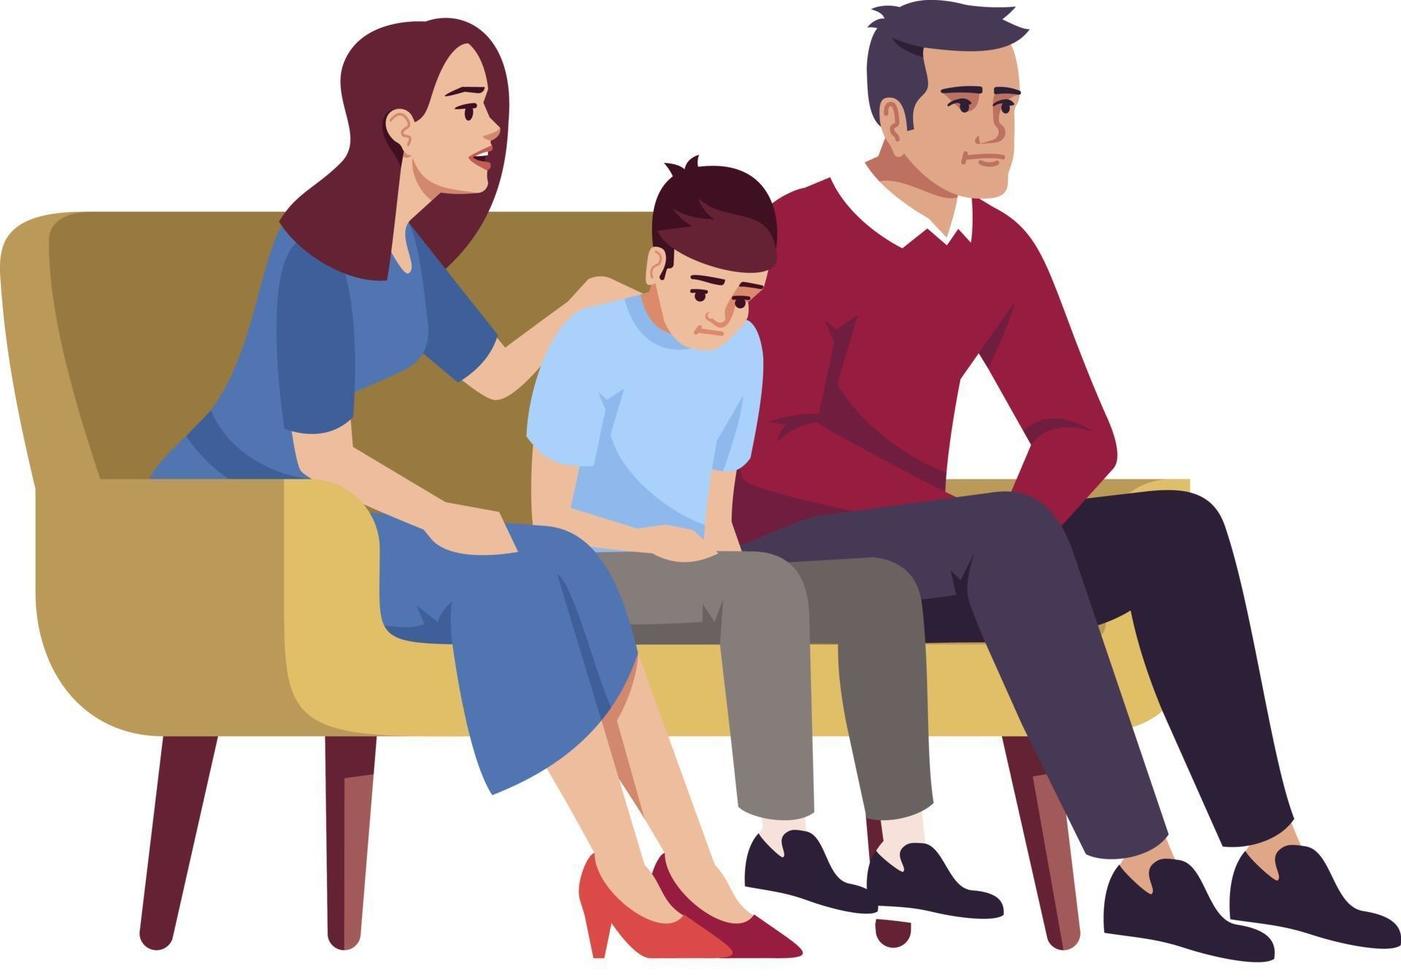 Family sitting on couch semi flat RGB color vector illustration